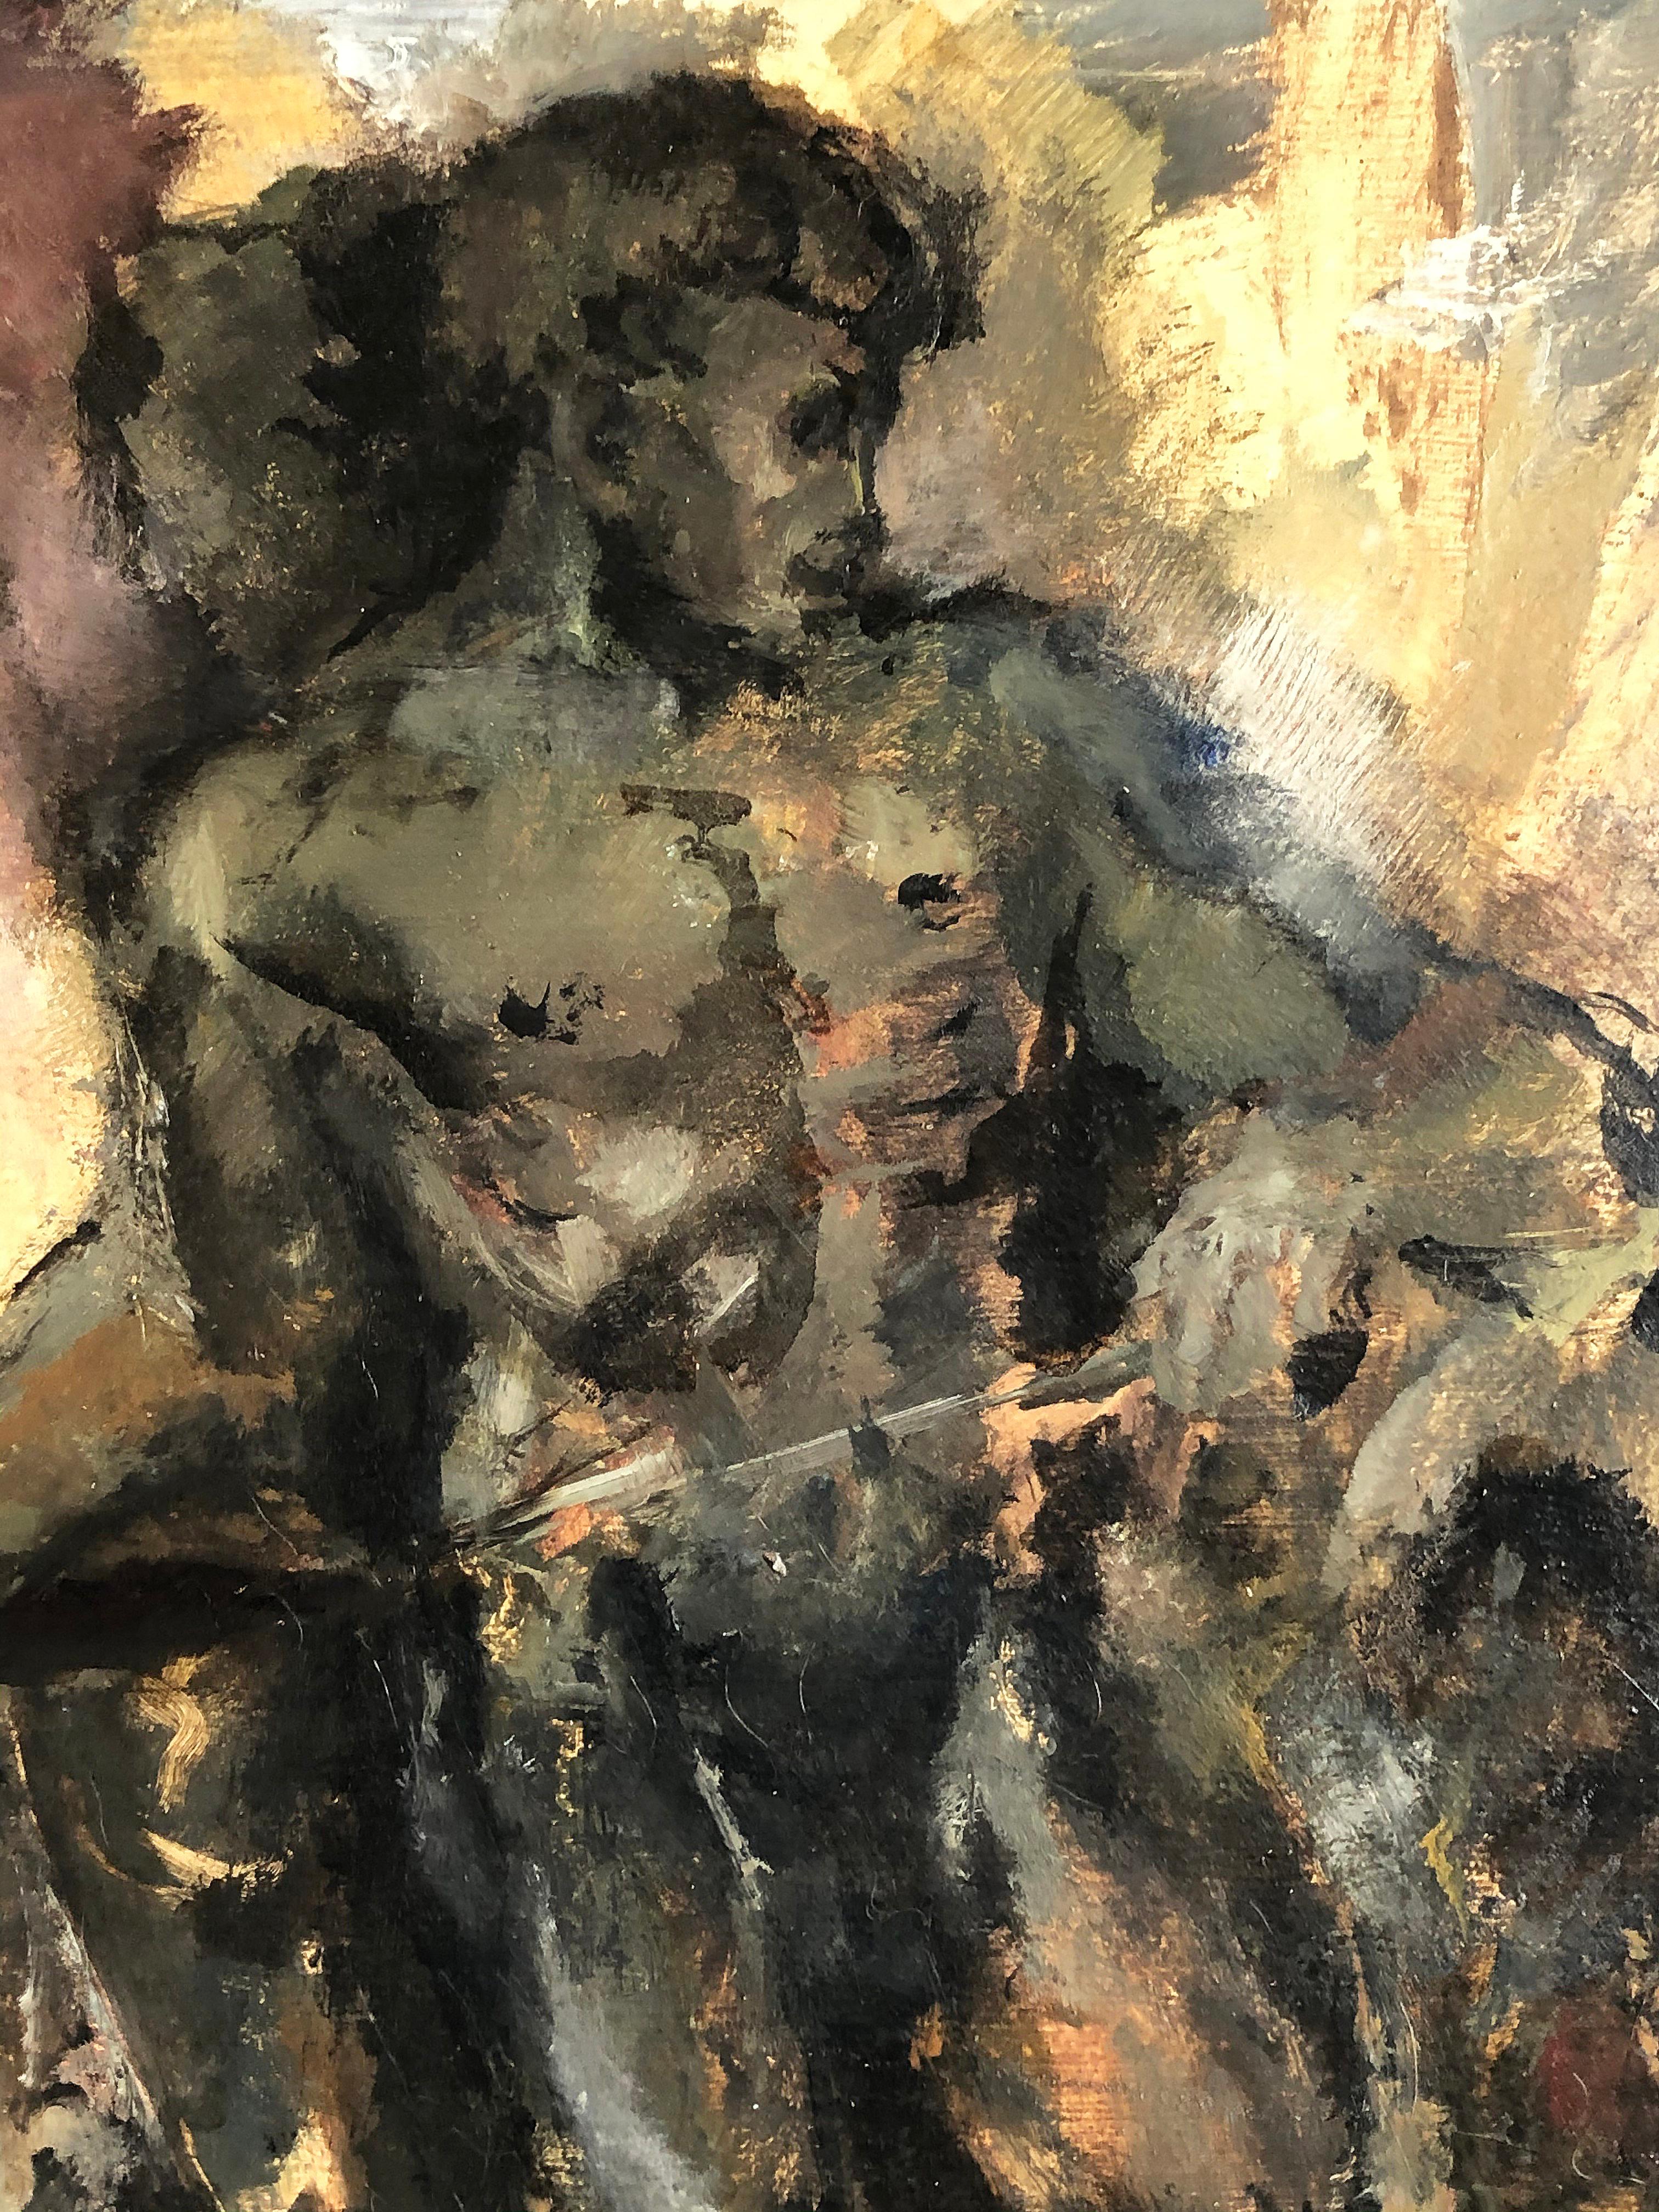 1950s vintage male nude study oil painting, signed

Offered is a 1950s male nude study oil painting on board. The work is quite dramatic and is presented in the original vintage frame. The use of colors is striking and the painting shows great